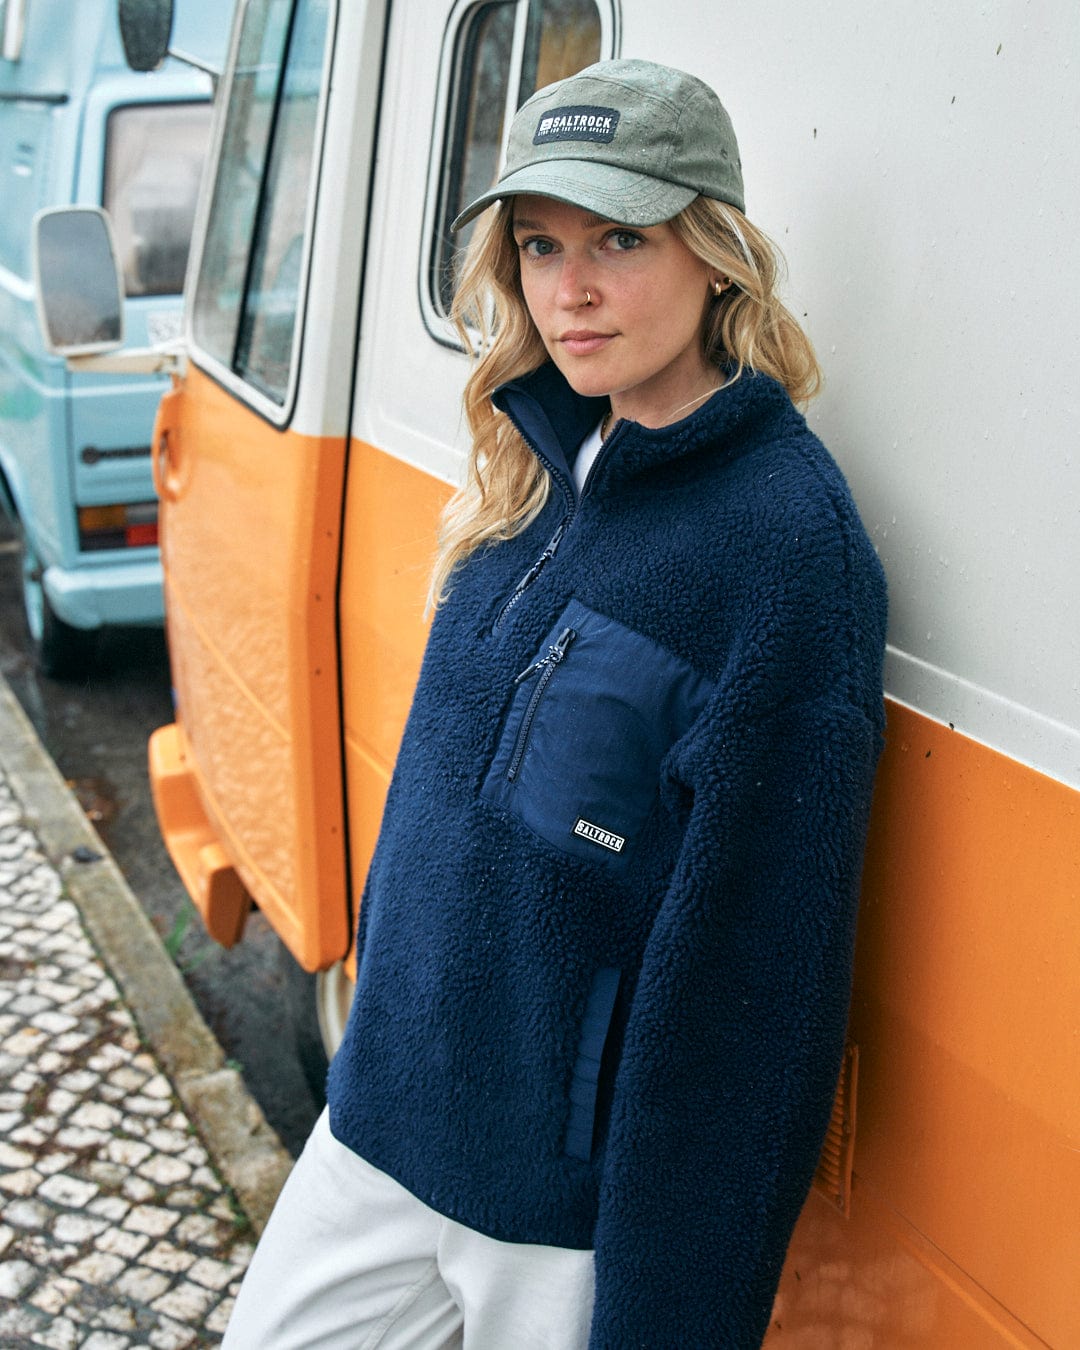 A woman wearing a blue fleece jacket and a Gaitor 5 Panel UPF cap by Saltrock stands in front of an orange and a blue van.